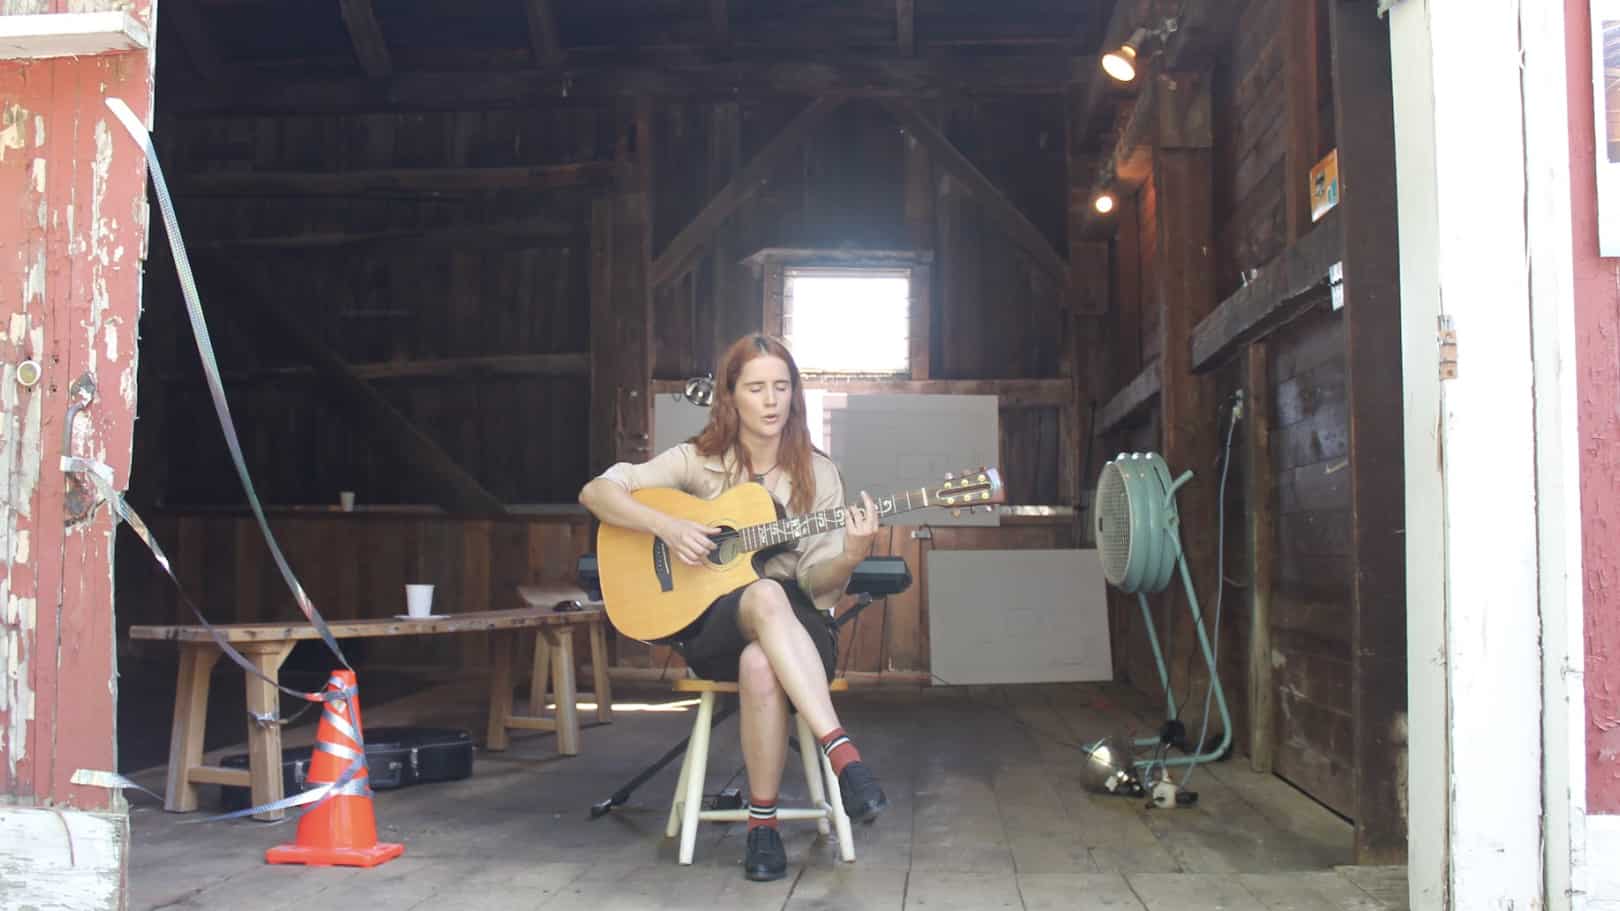 Rae Isla performs for an Open House at the barn in Lee. Press photo courtesy of the Barn